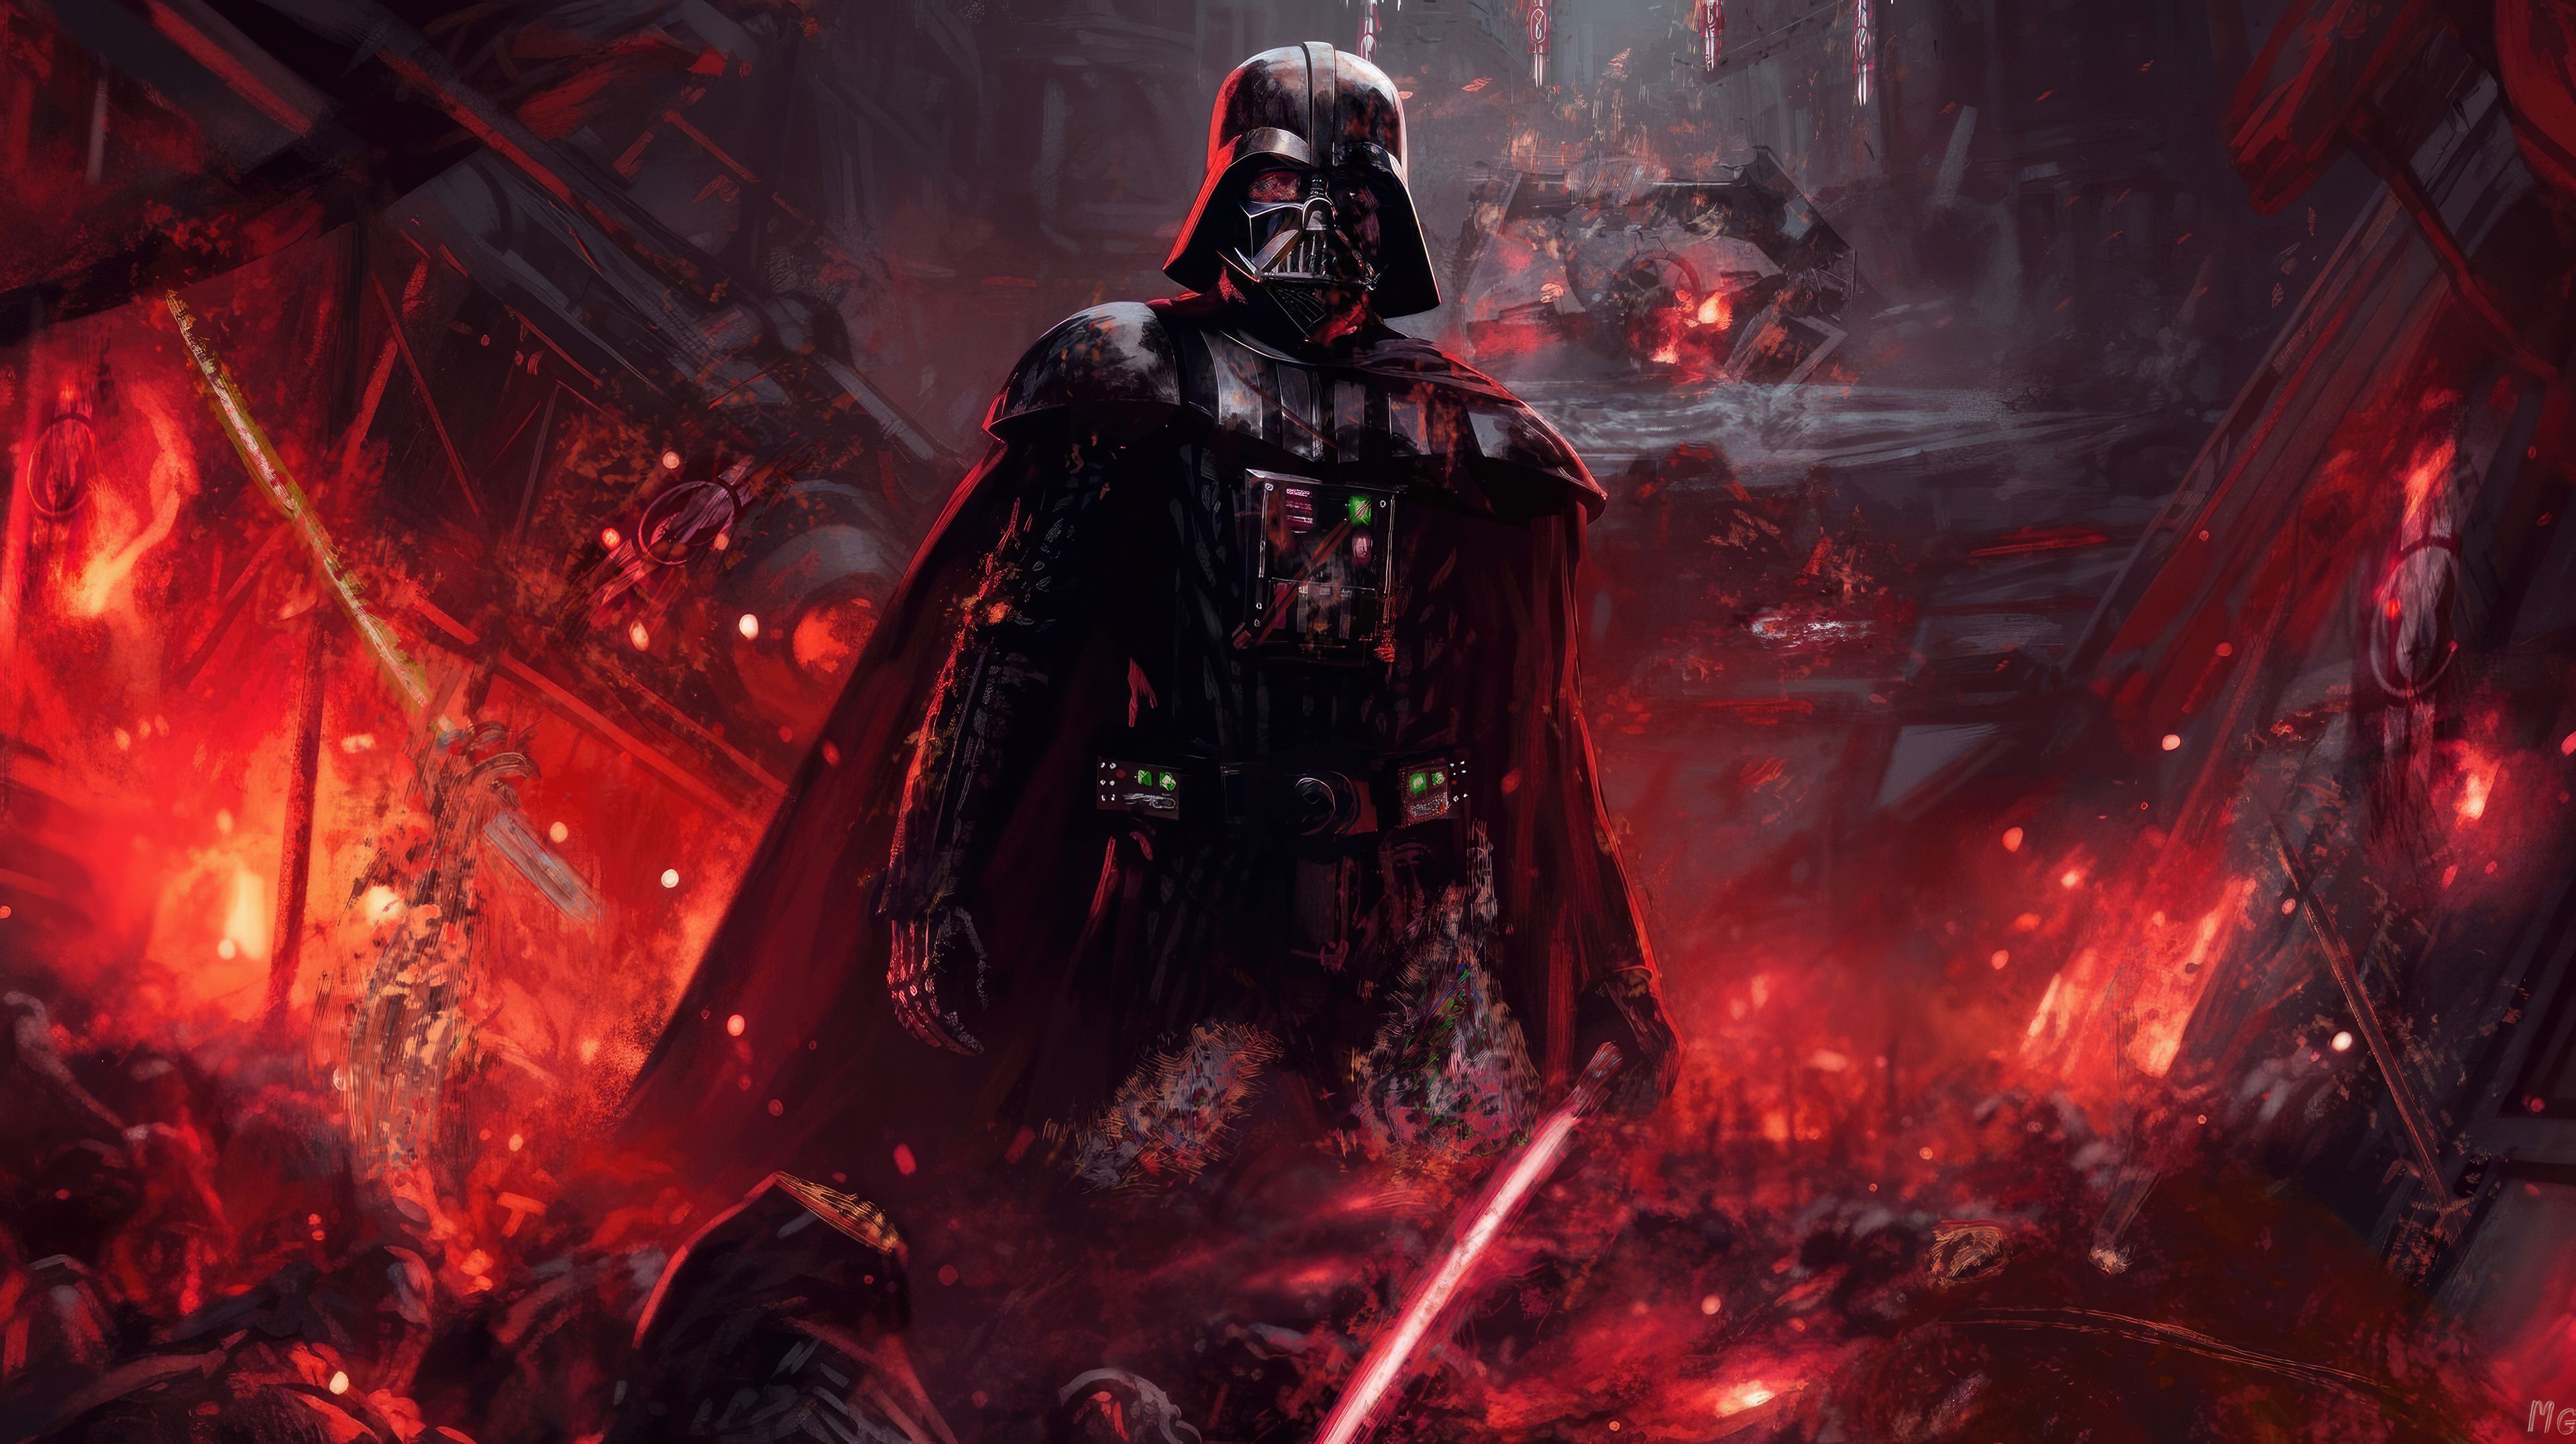 Darth Vader in the middle of an explosion. - Darth Vader